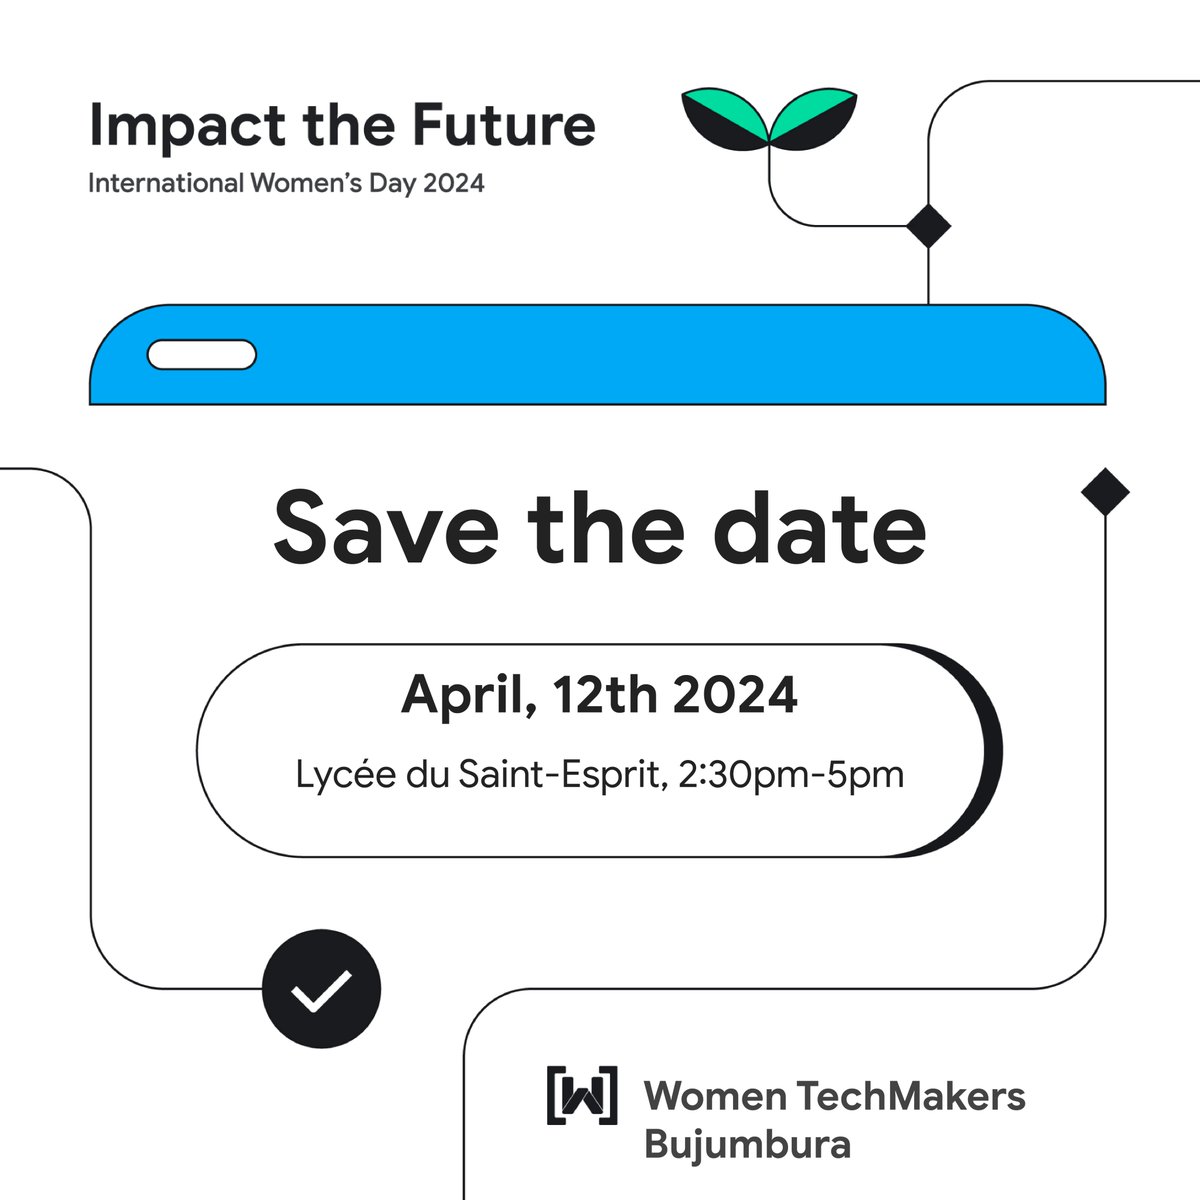 Mark your calendar🗓️😇. We are celebrating the impact of #WomenInTech around the globe with the @WomenTechmakers community in Bujumbura on 12th April!🤩 #WTMImpactTheFuture #IWD24